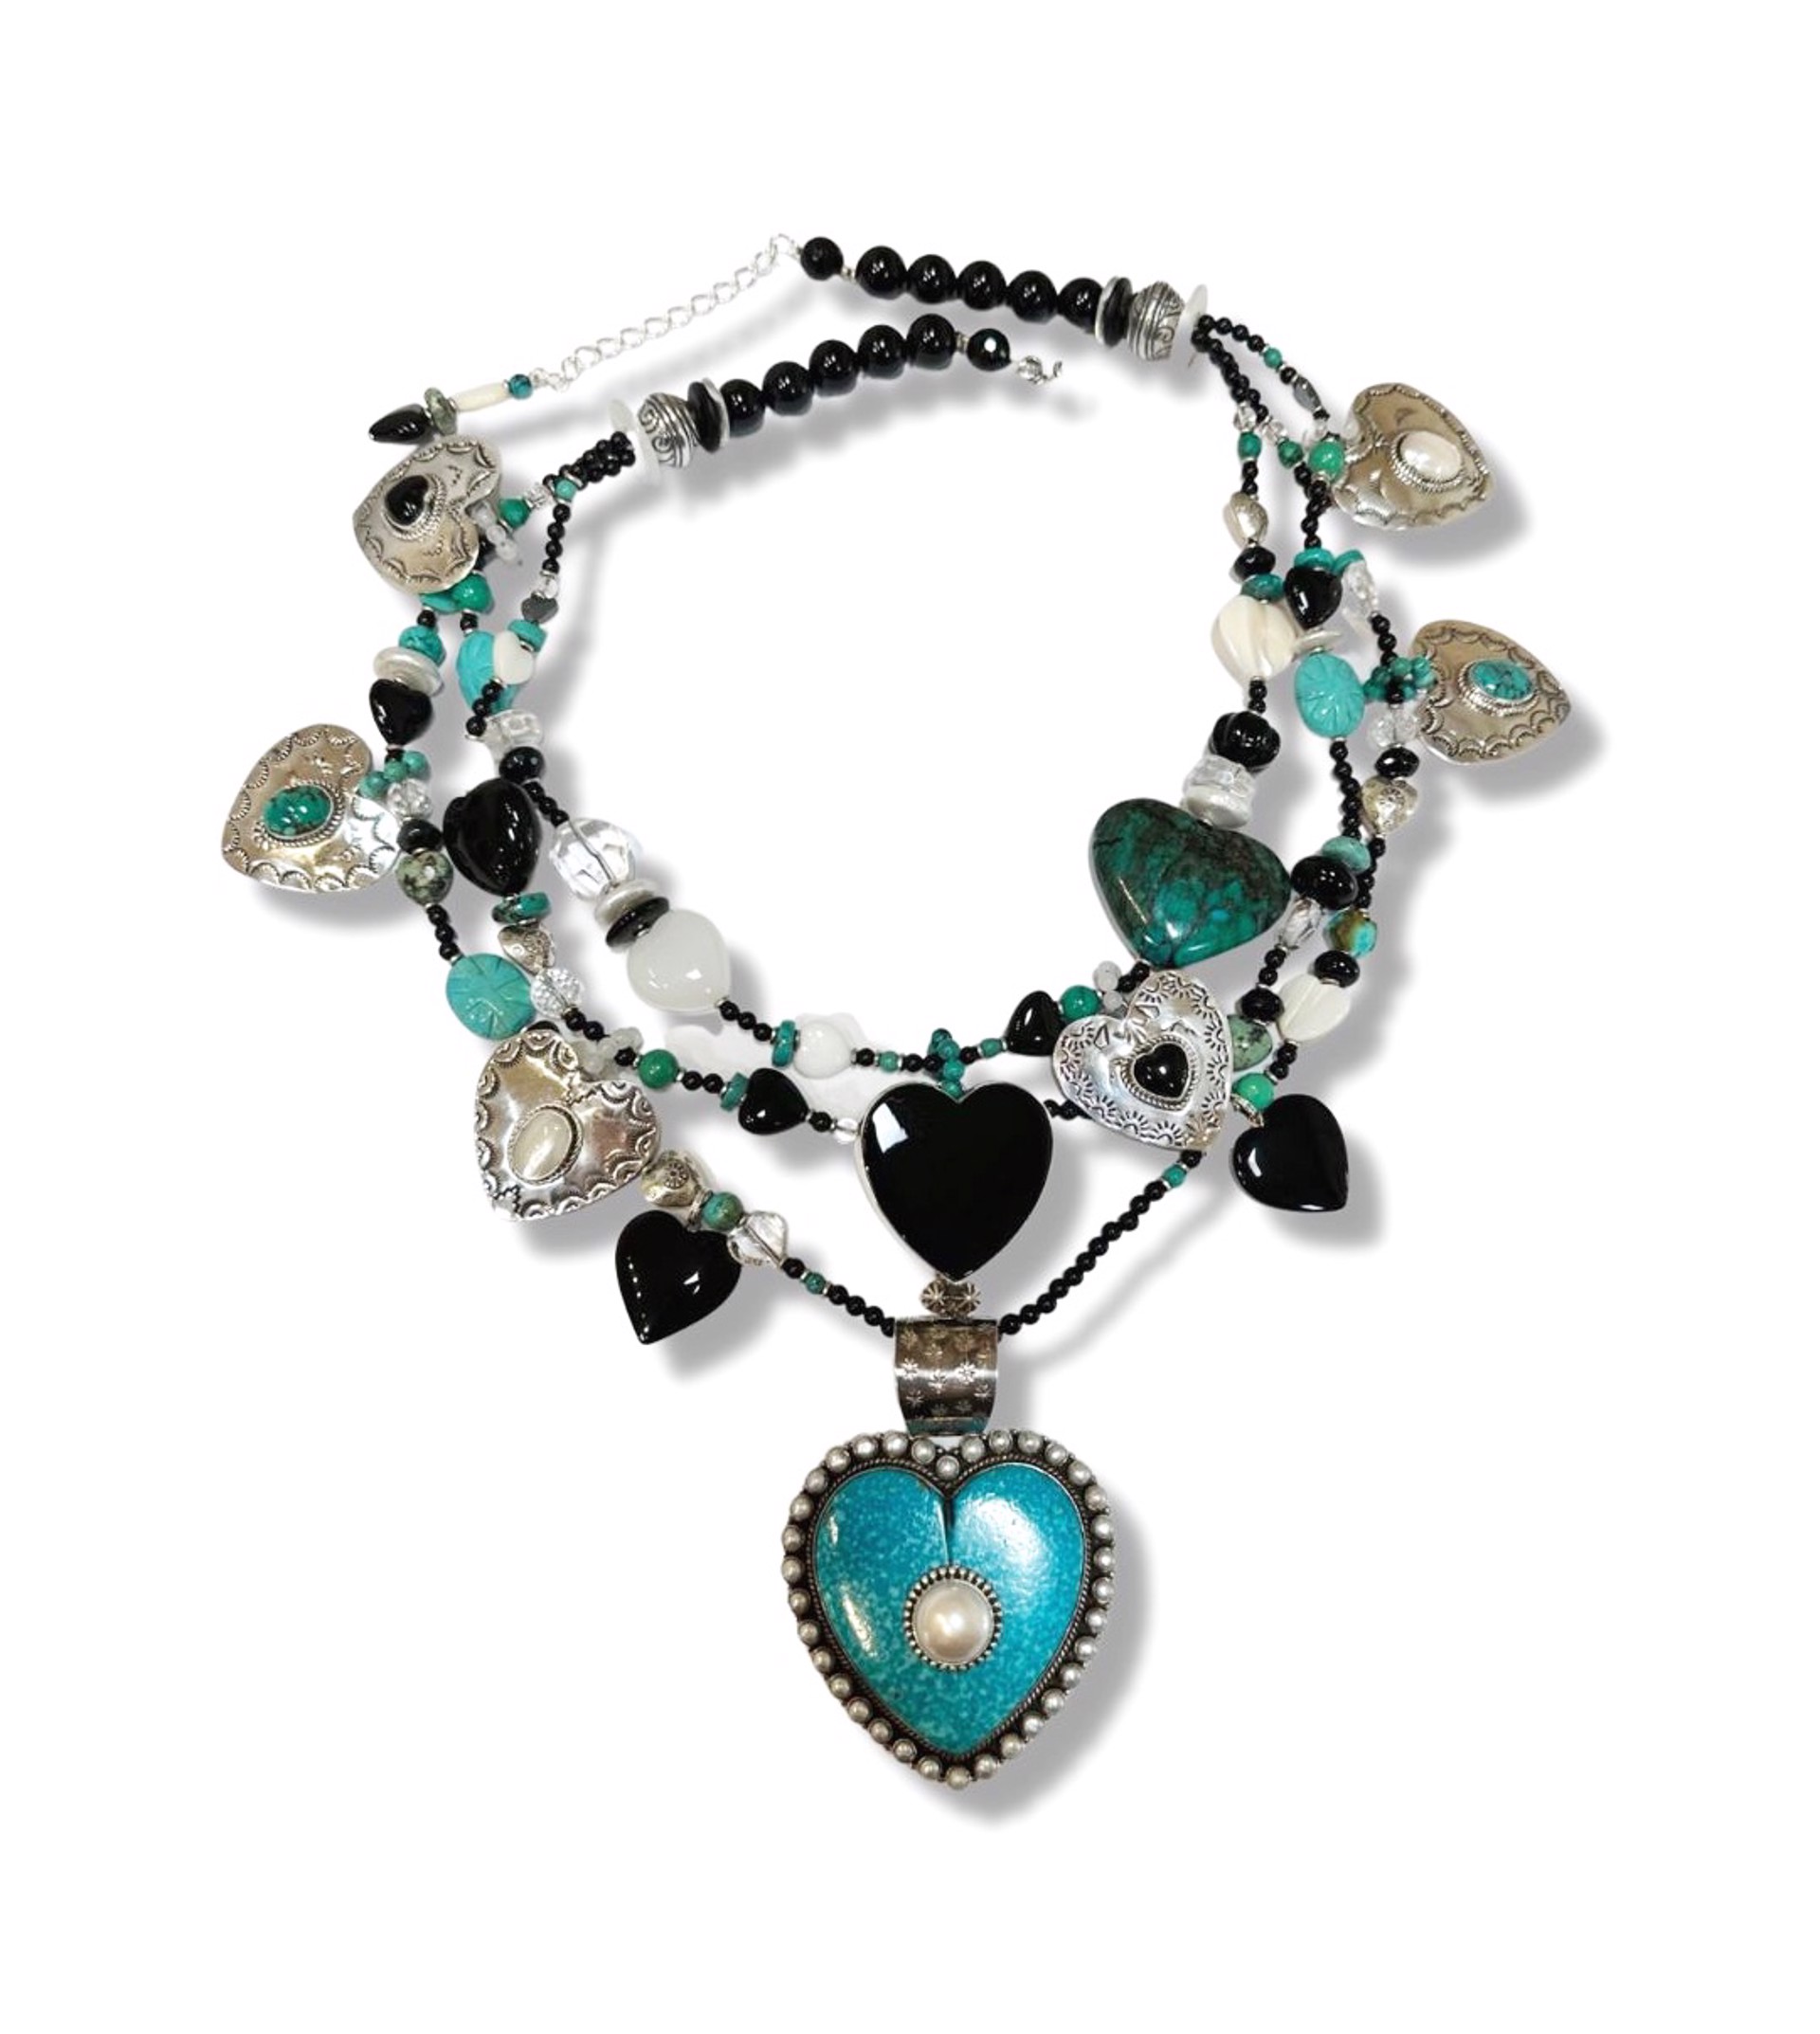 KY 1491 Three Strand Turquoise, Onyx and Crystal Necklace by Kim Yubeta